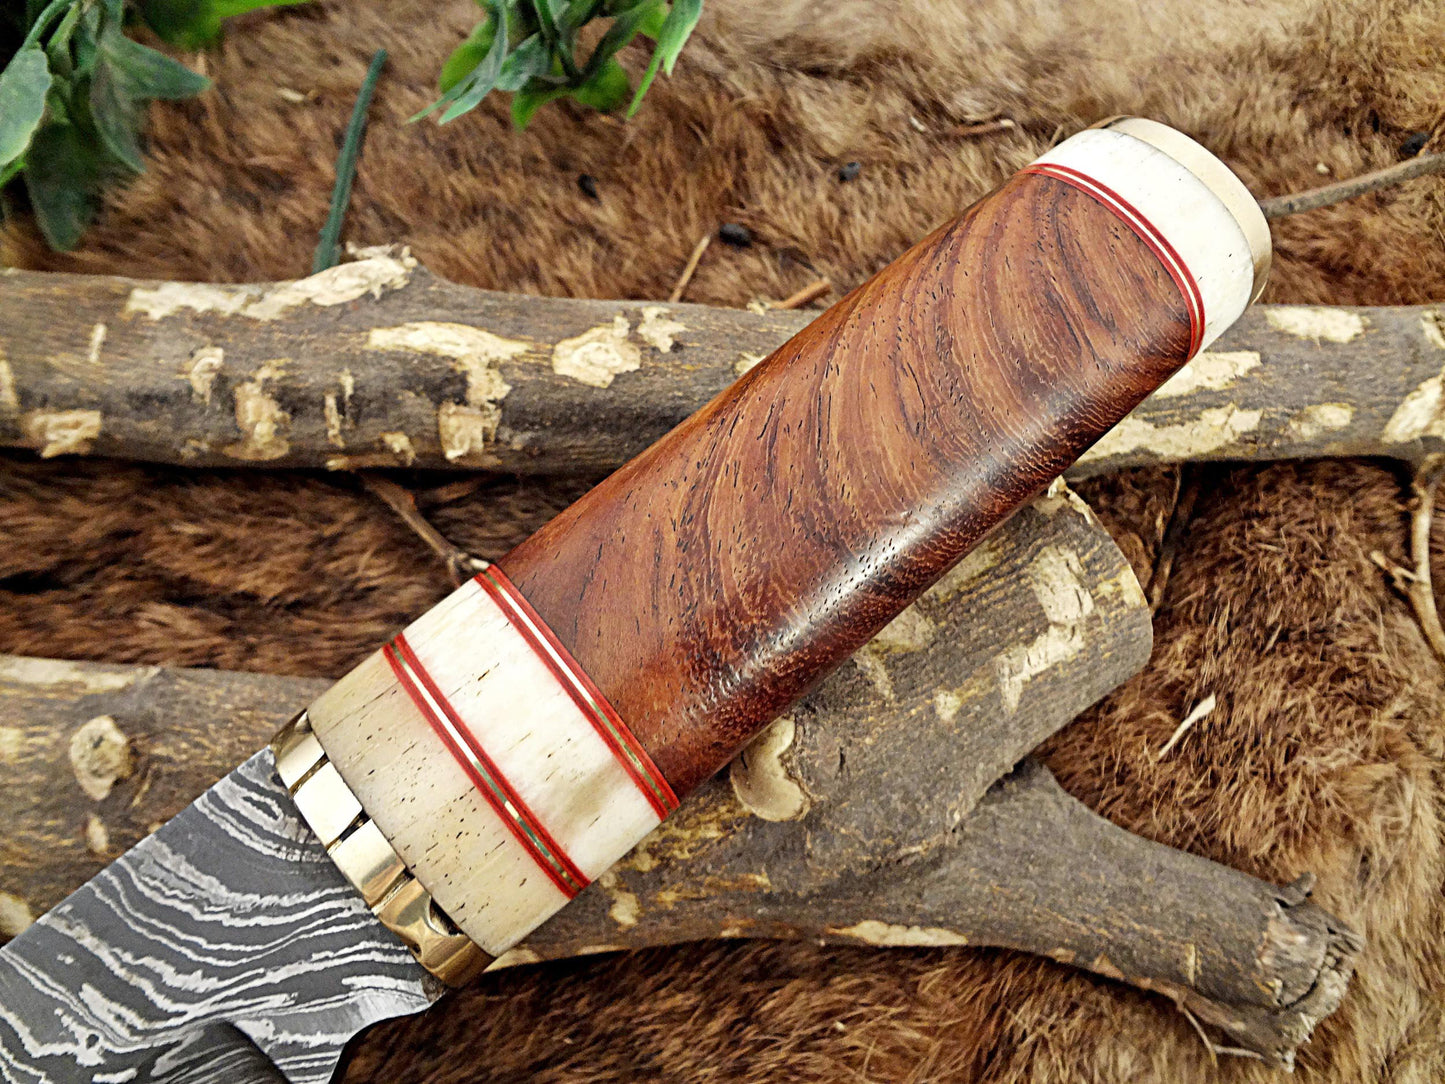 11" Long Damascus steel hunting Knife hand forged Twist pattern, Natural wood with camel bone & brass scale, thick Cow hide leather sheath